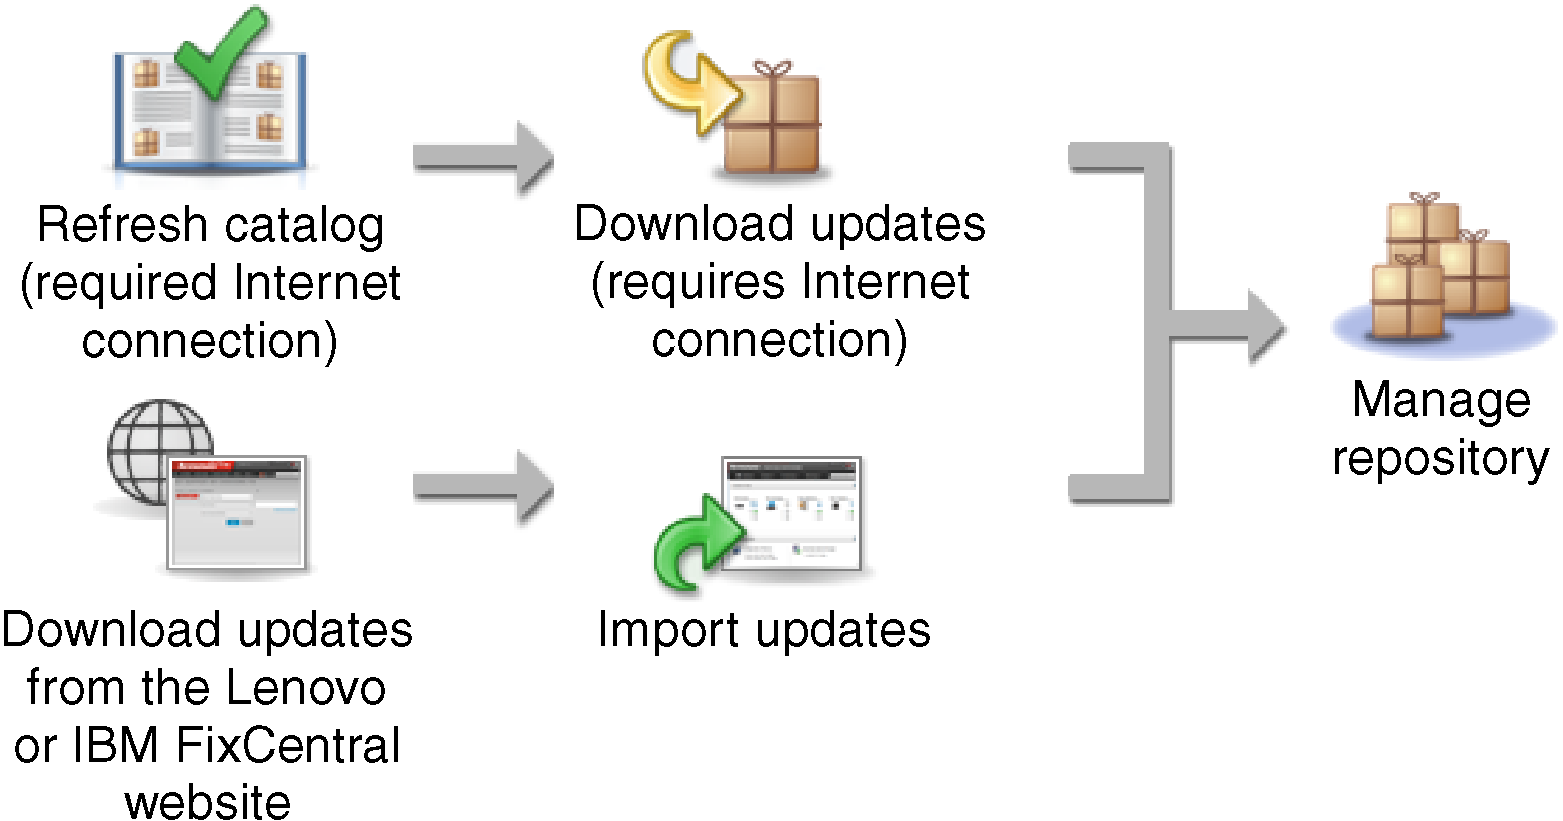 Illustrates the steps involved in managing the repository, including refreshing the product catalog and acquiring or importing firmware updates.